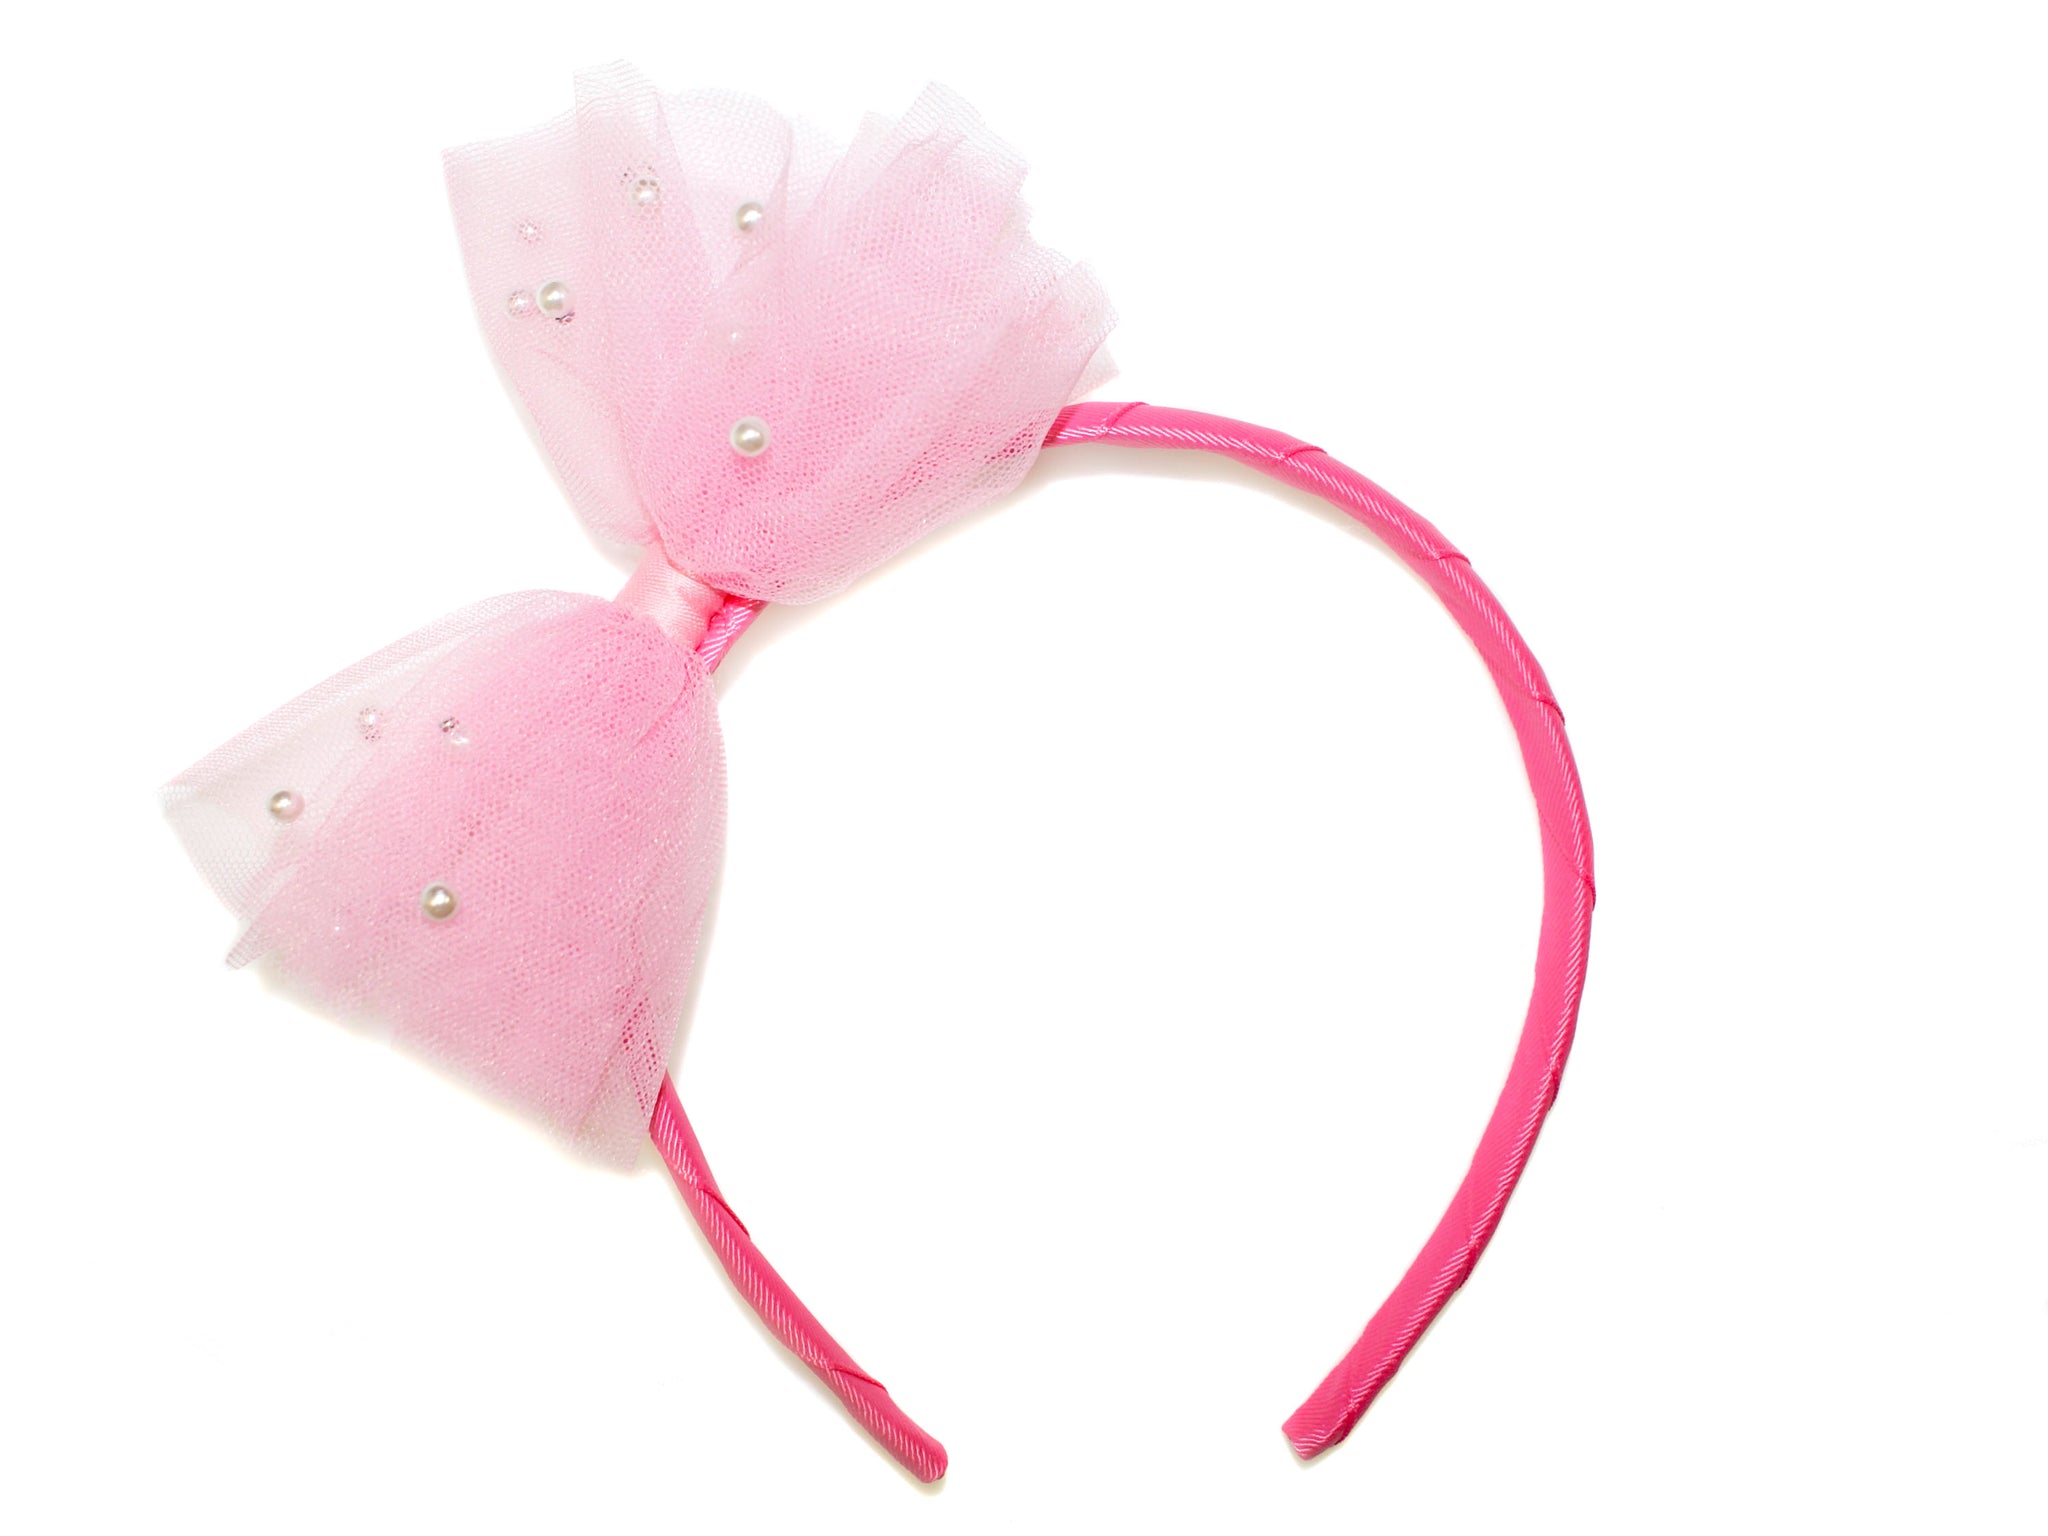 Pearl Tulle Bow Alice Band - Dark Pink